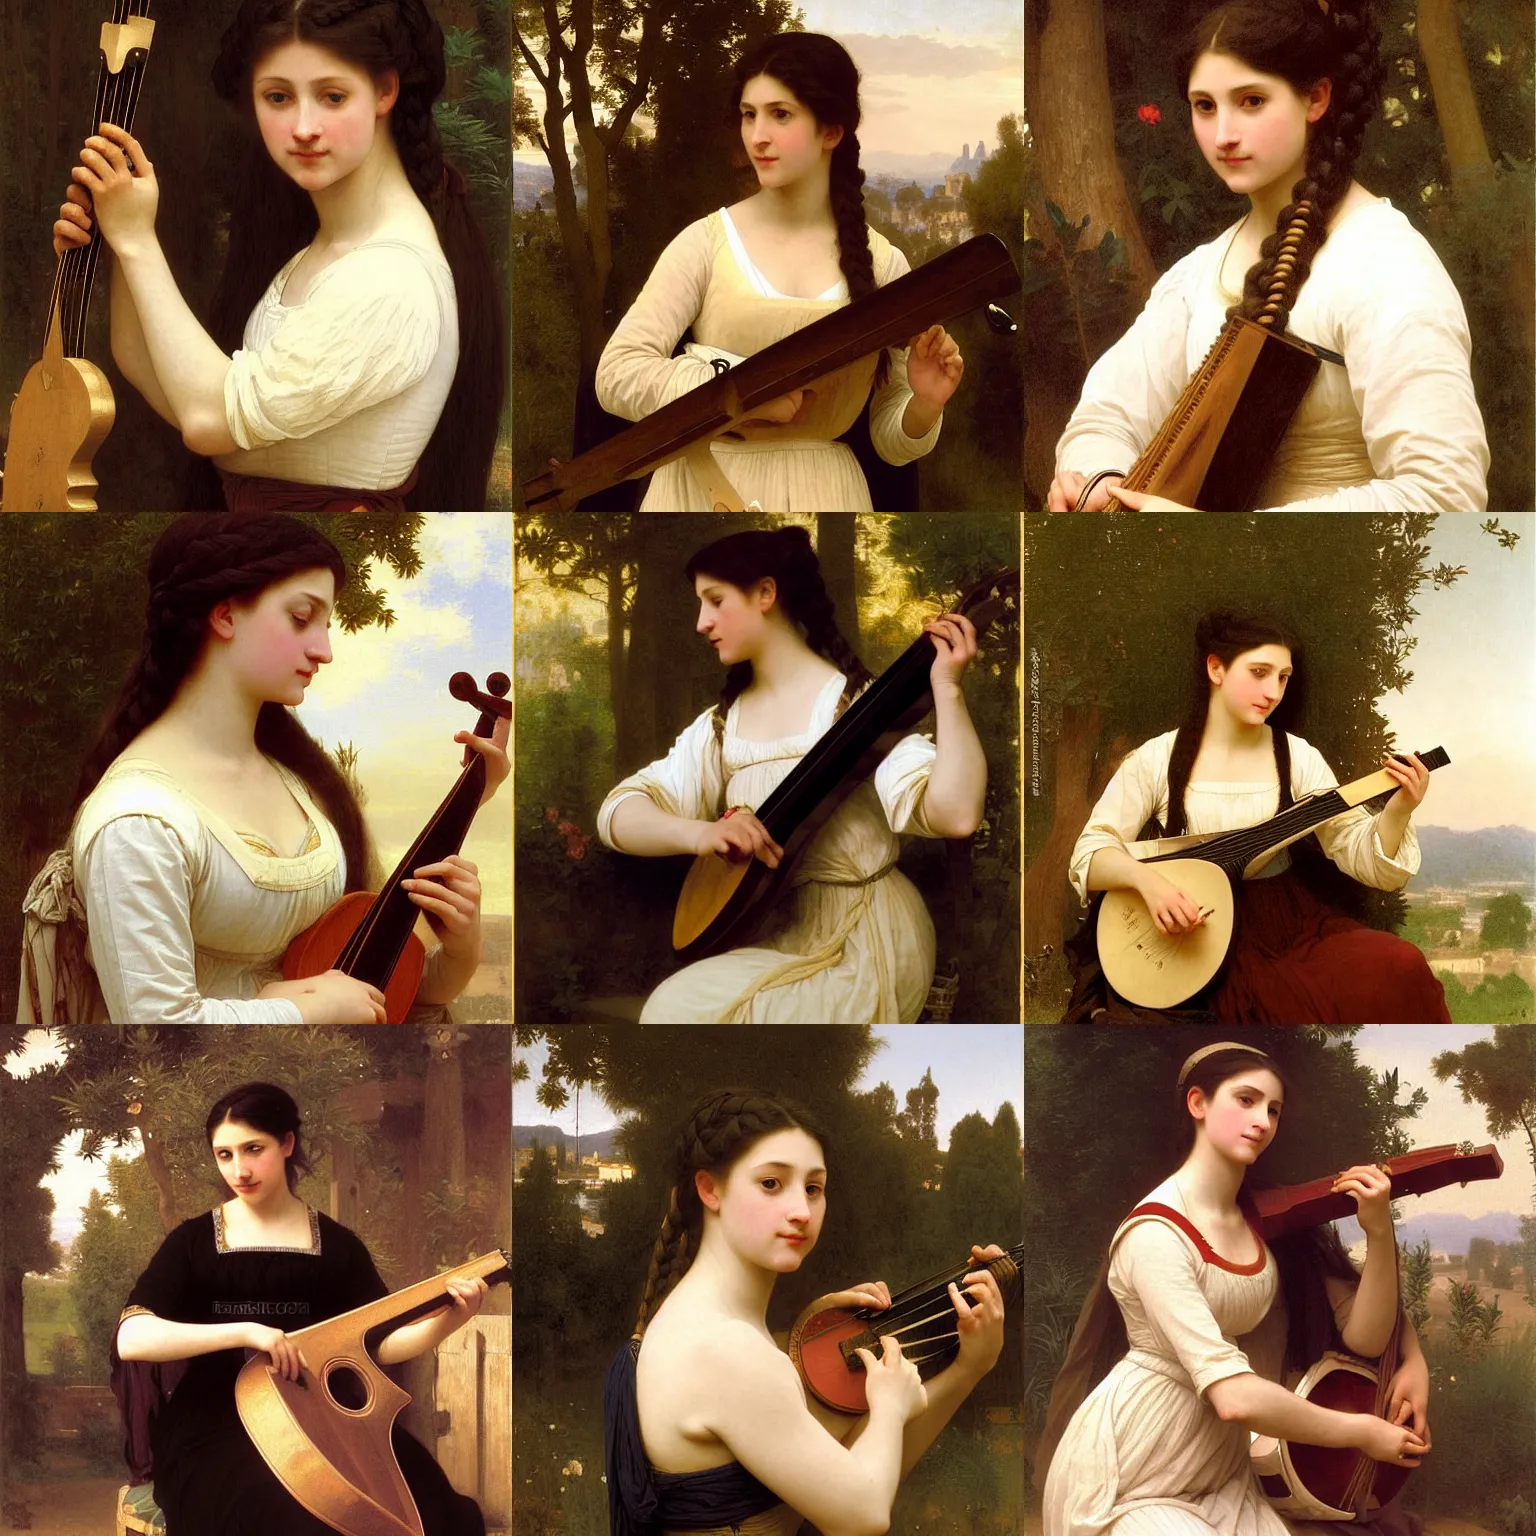 Prompt: Tall Englishwoman playing the lute. Slender neck. Master Lutist with dark hair braided hair. Art by William-Adolphe Bouguereau. During golden hour. Extremely detailed. Beautiful. 4K. Award winning.